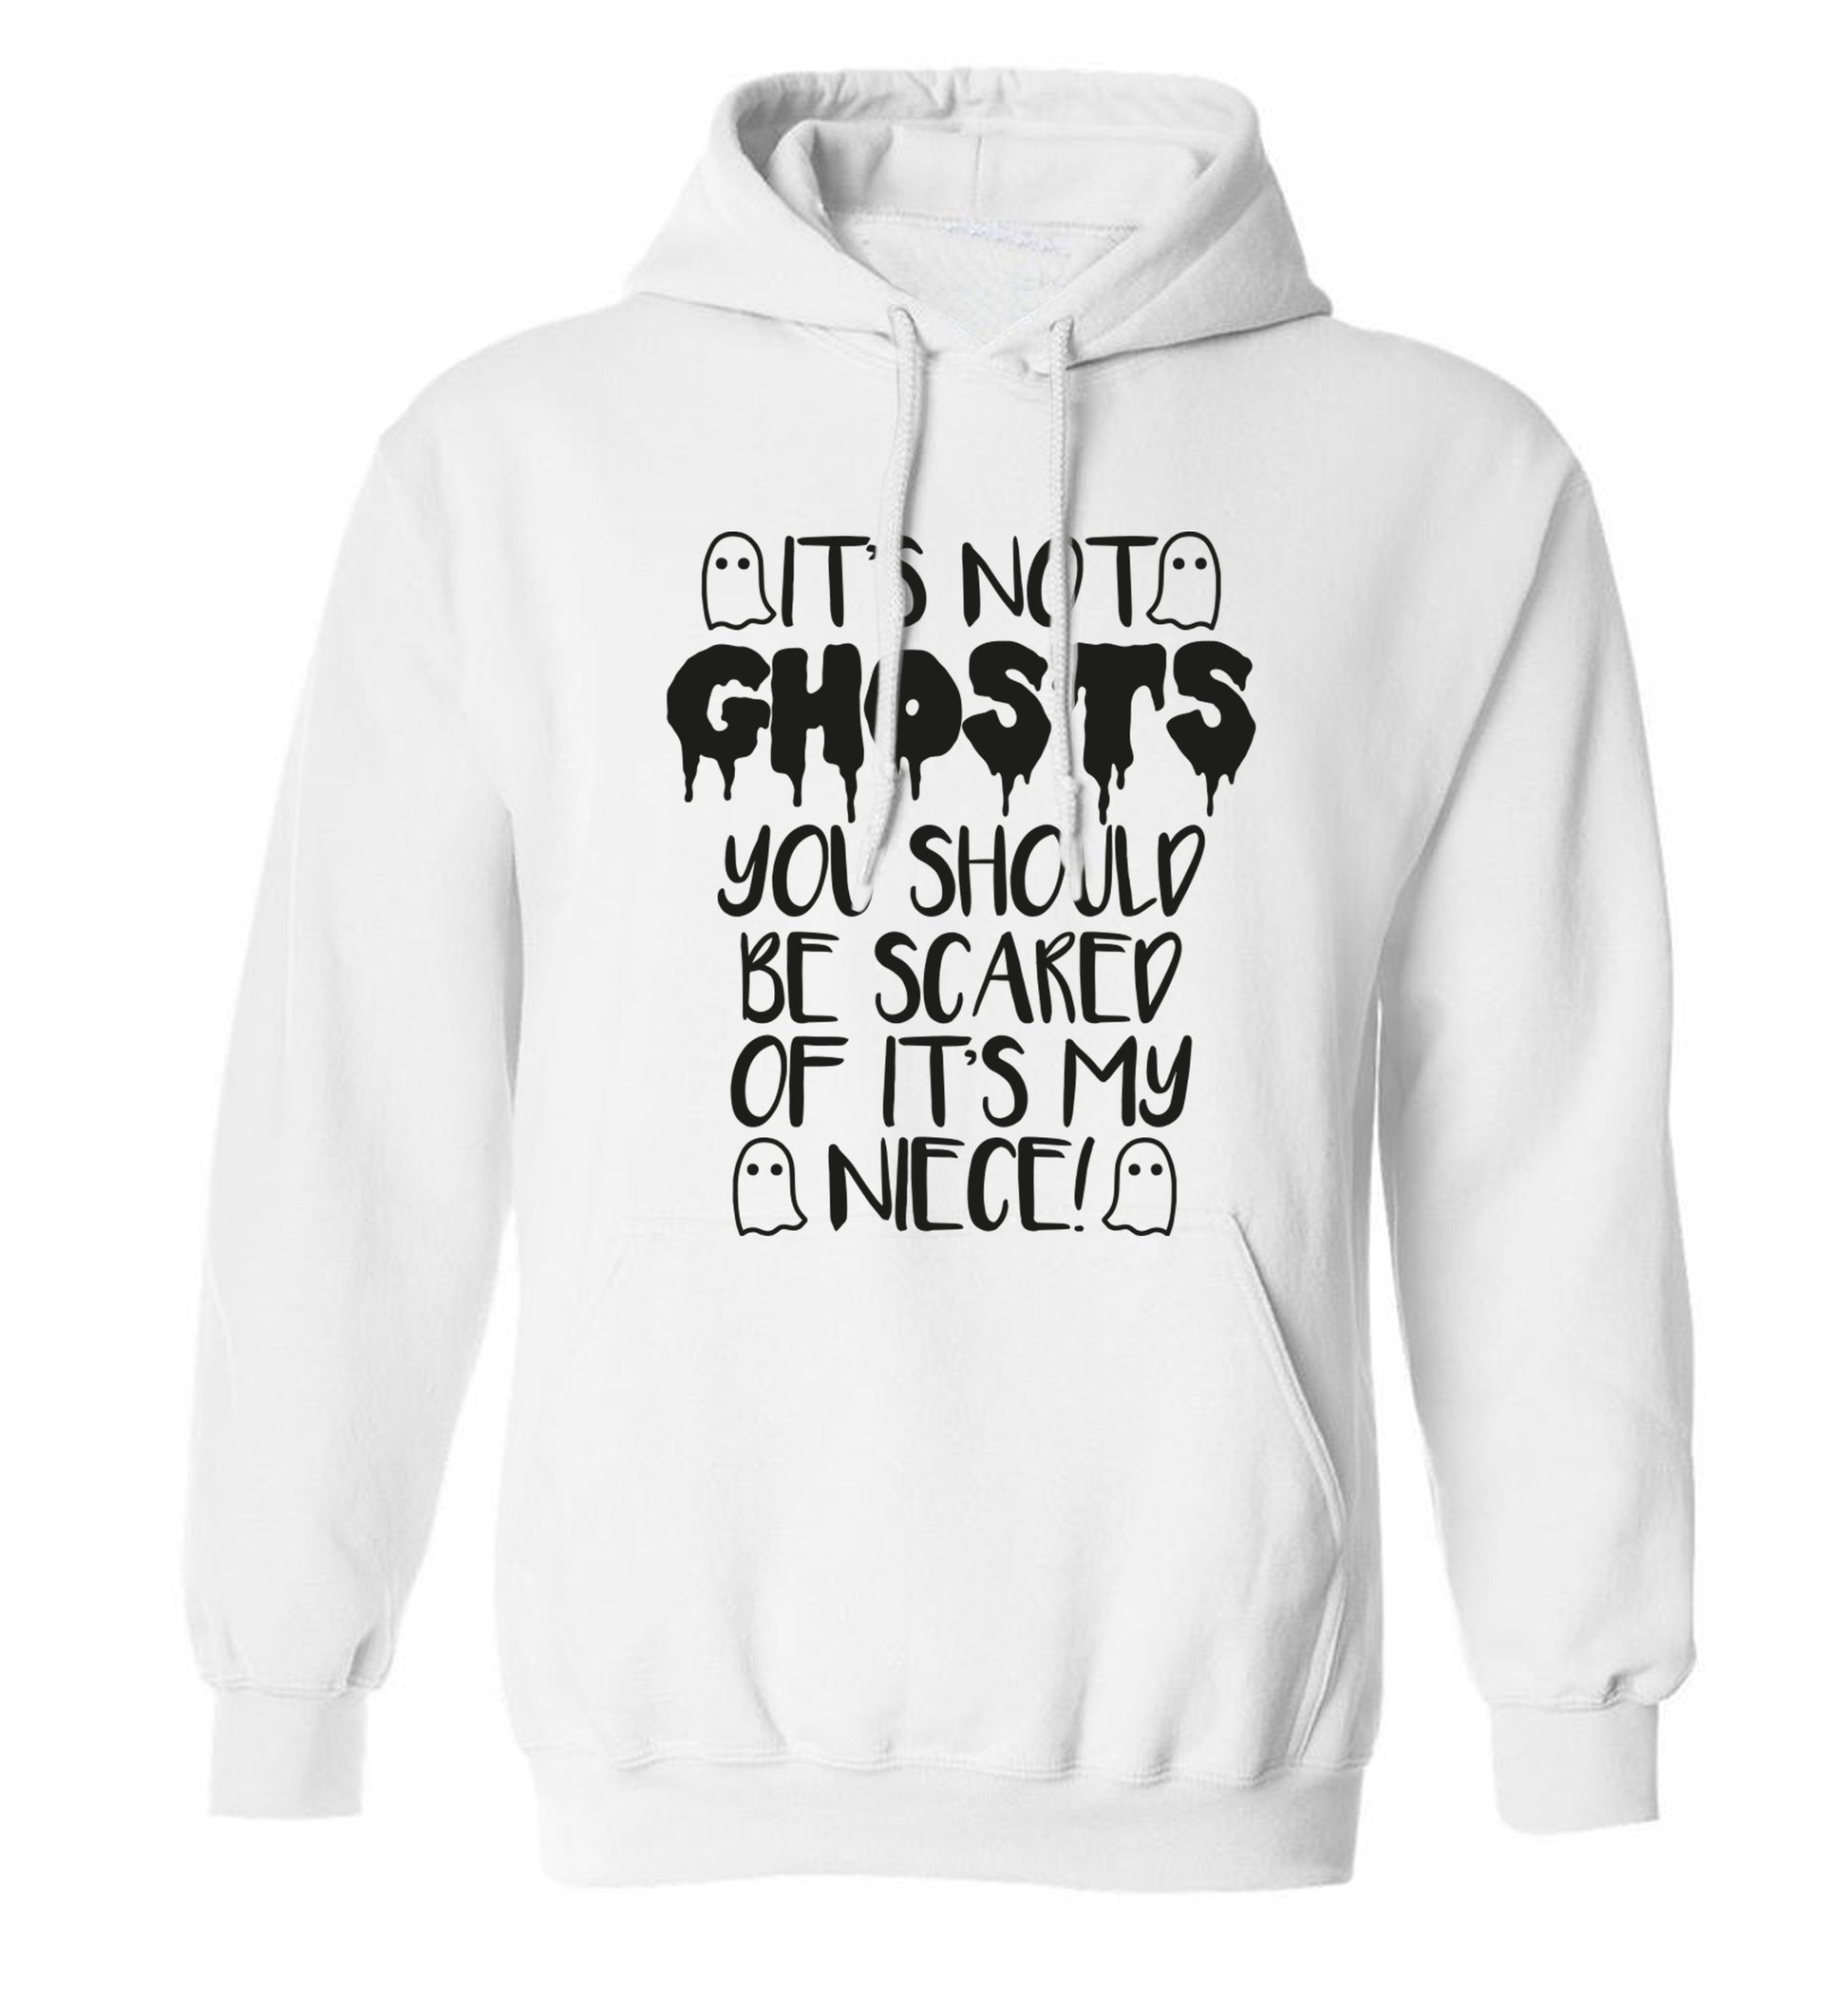 It's not ghosts you should be scared of it's my niece! adults unisex white hoodie 2XL